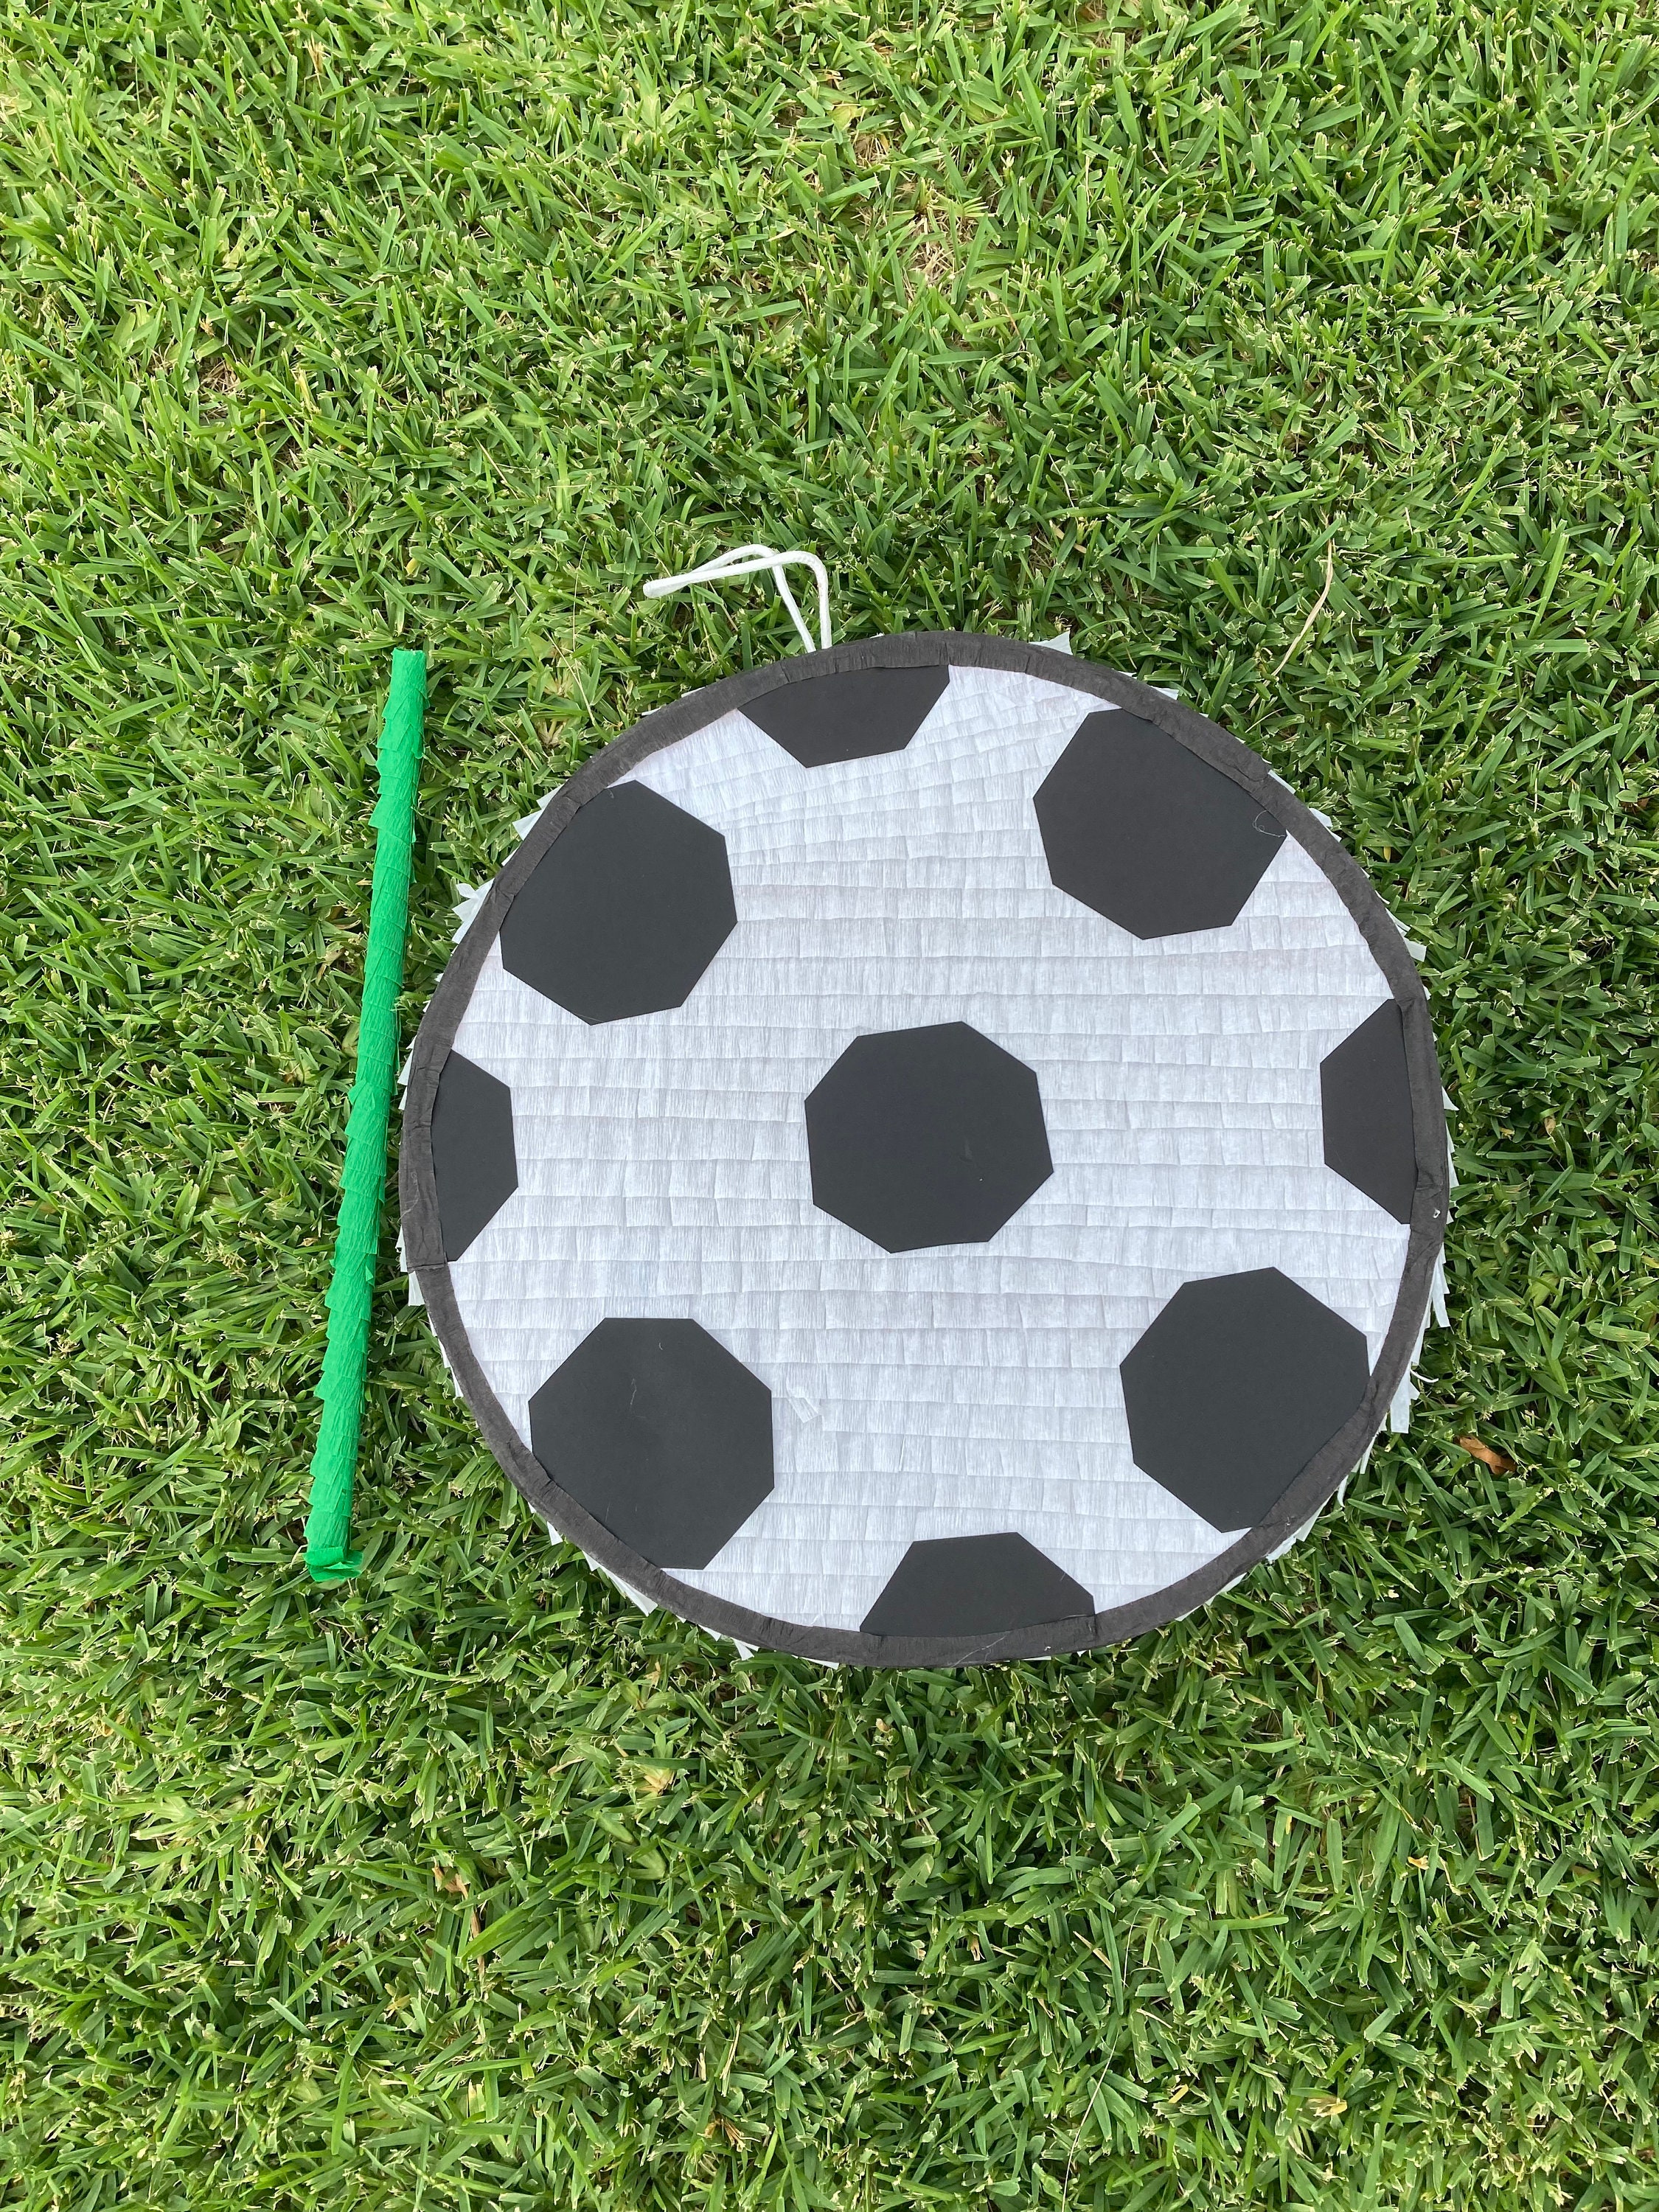 Soccer Ball Pinata Customize Your Own Colors Pull Strings or Whack Style 